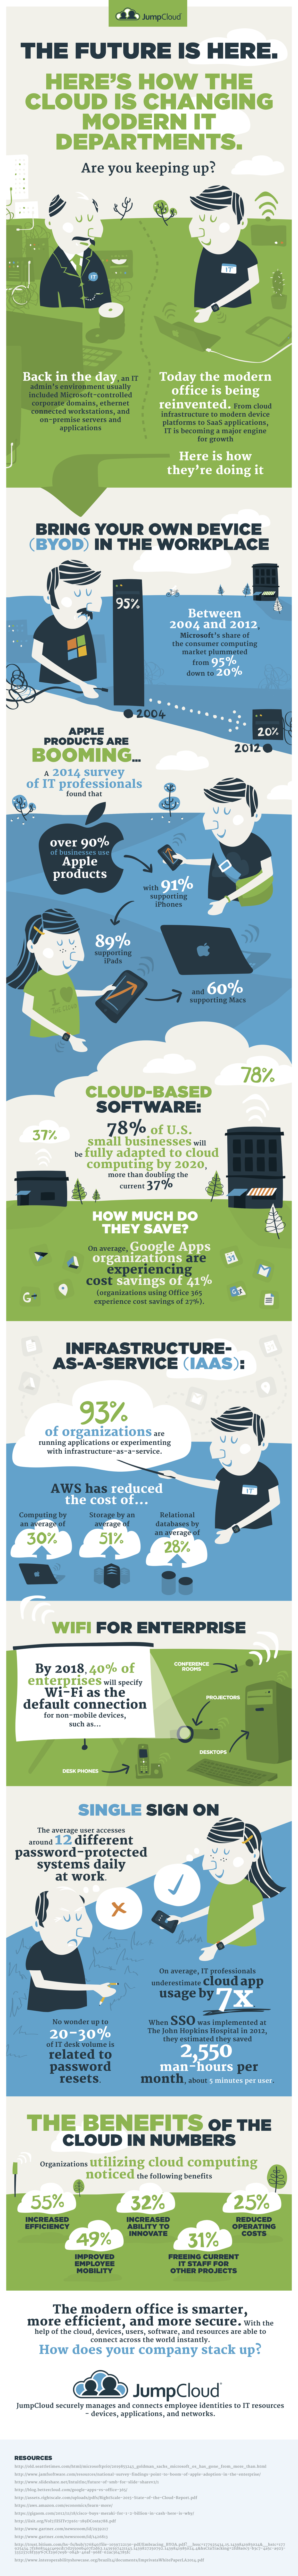 The Future of IT Infographic